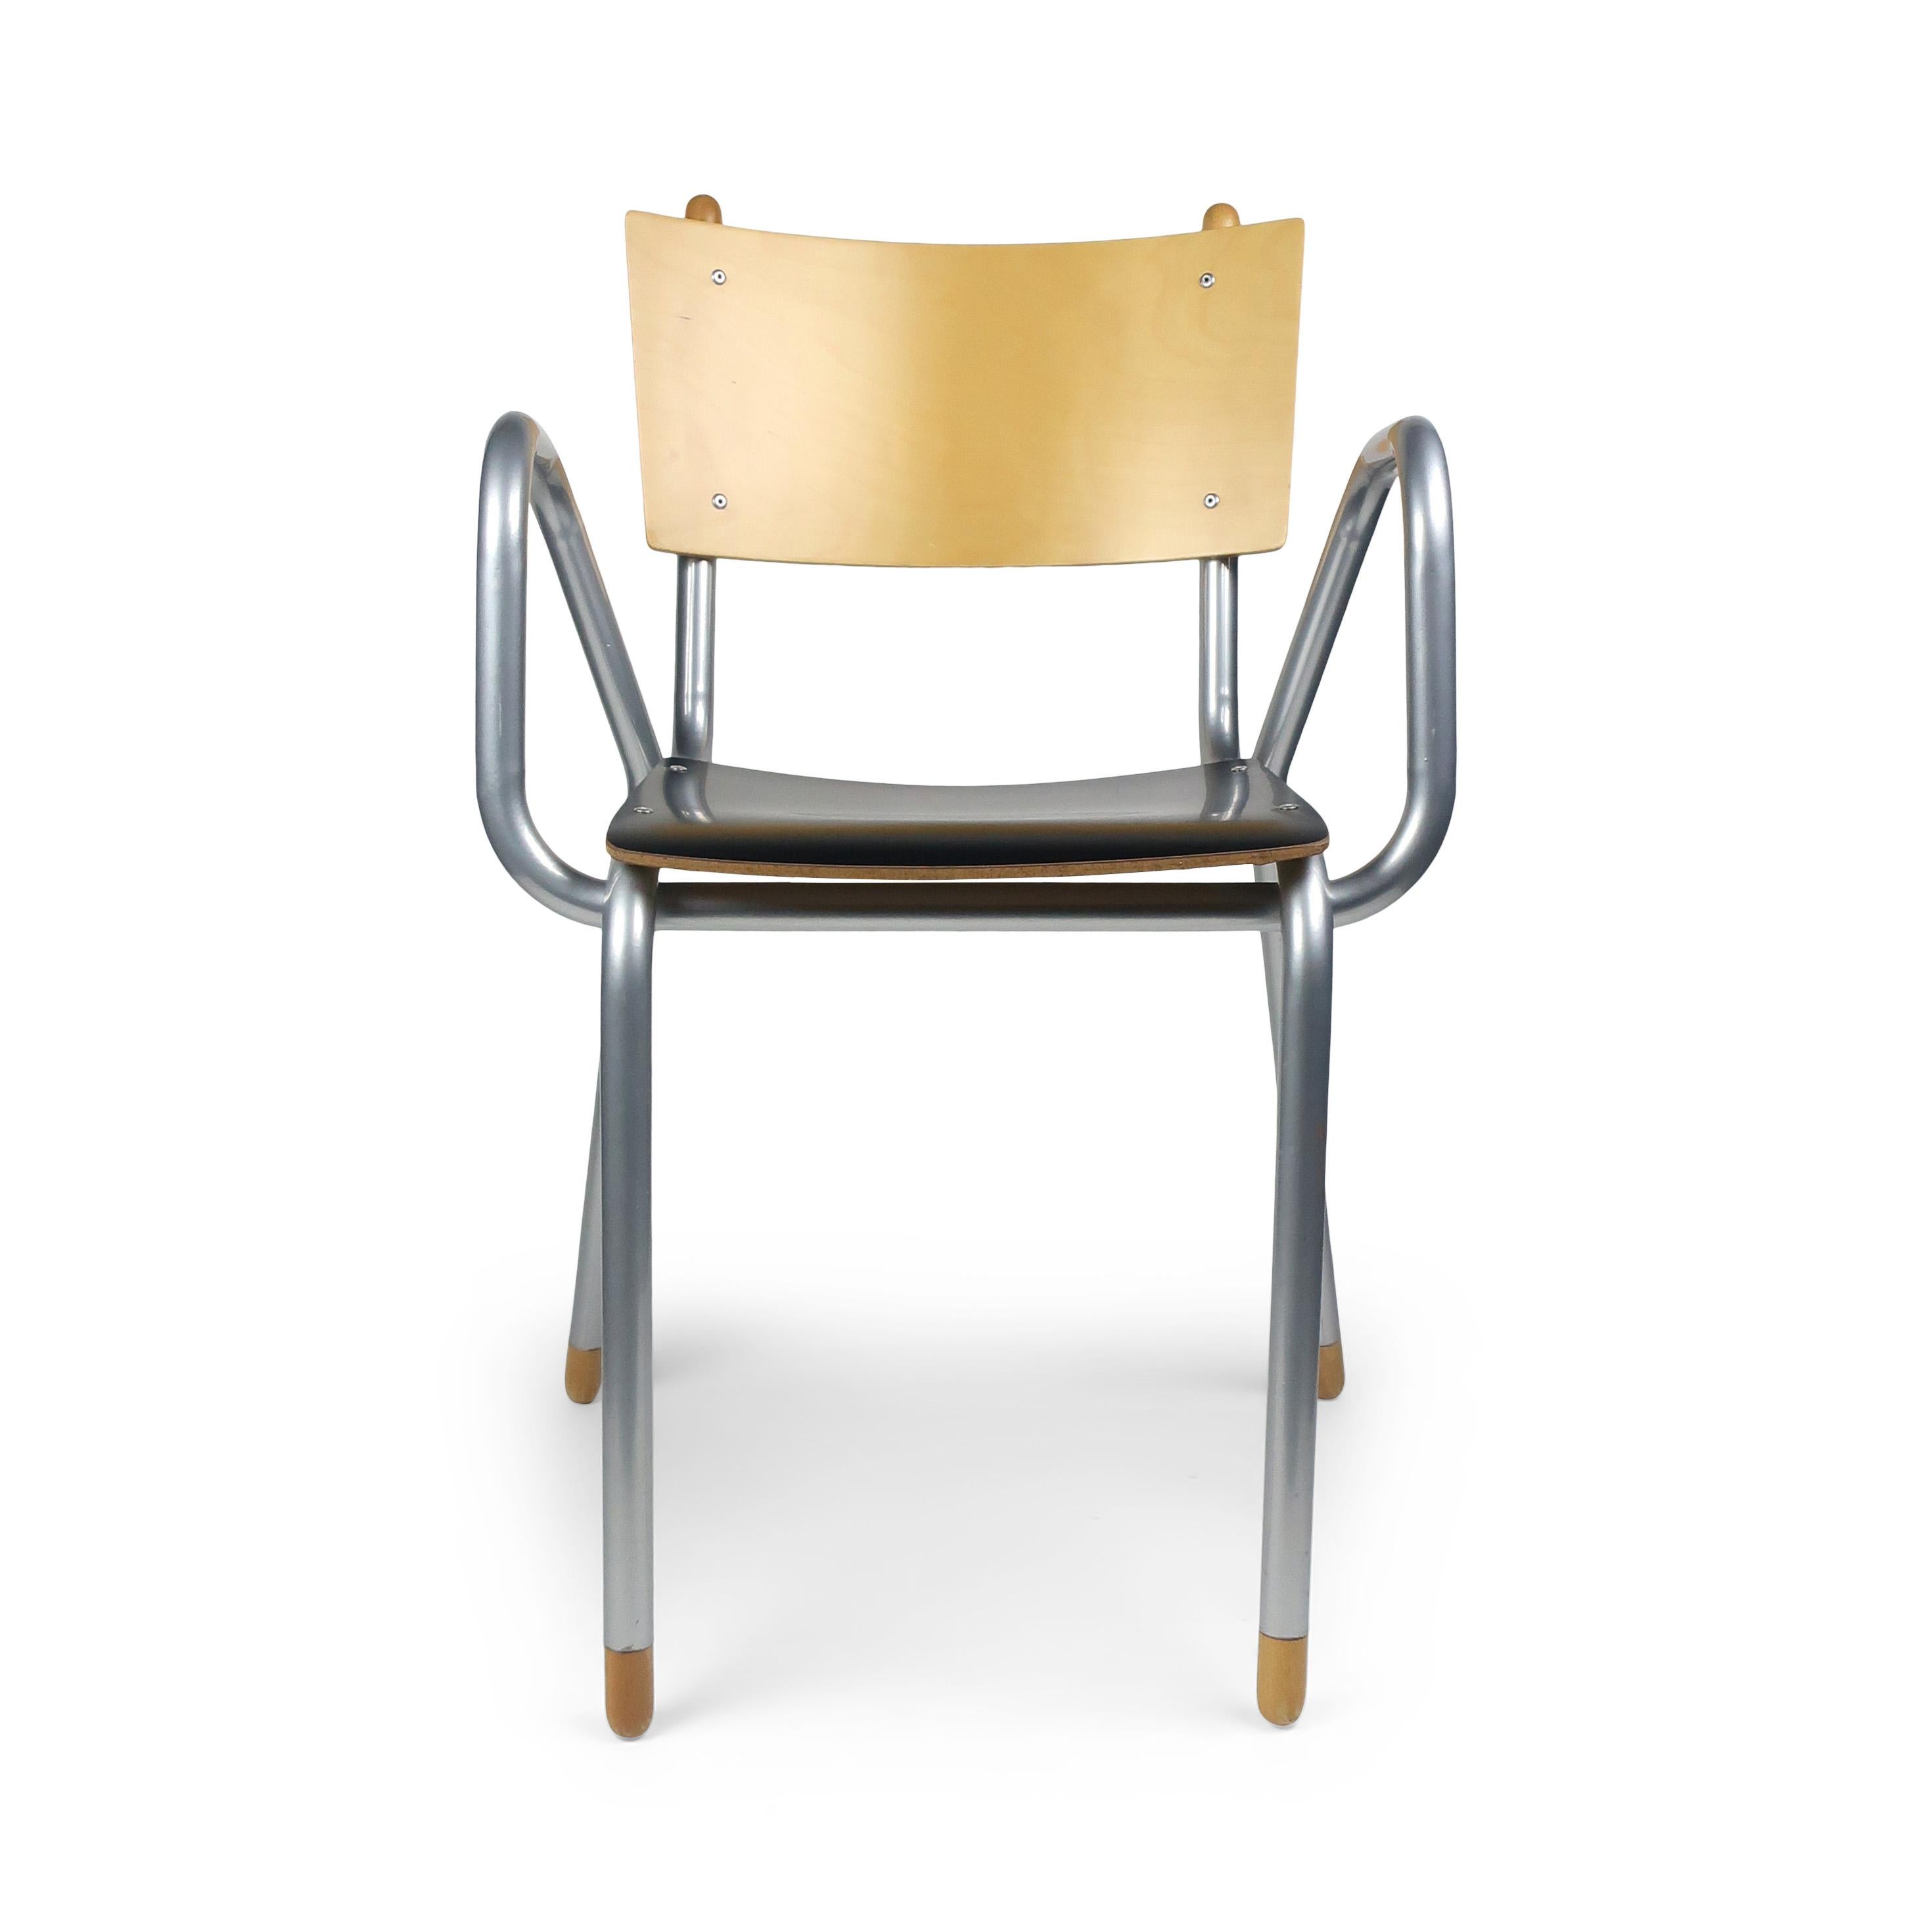 Designed by Maurizio Peregalli for ZEUS in 1996, this pair of Classe Prima B armchairs have natural birch backs, black bilaminate seats, and silver epoxy painted metal frames. A whimsical silhouette with the attention to detail found in great